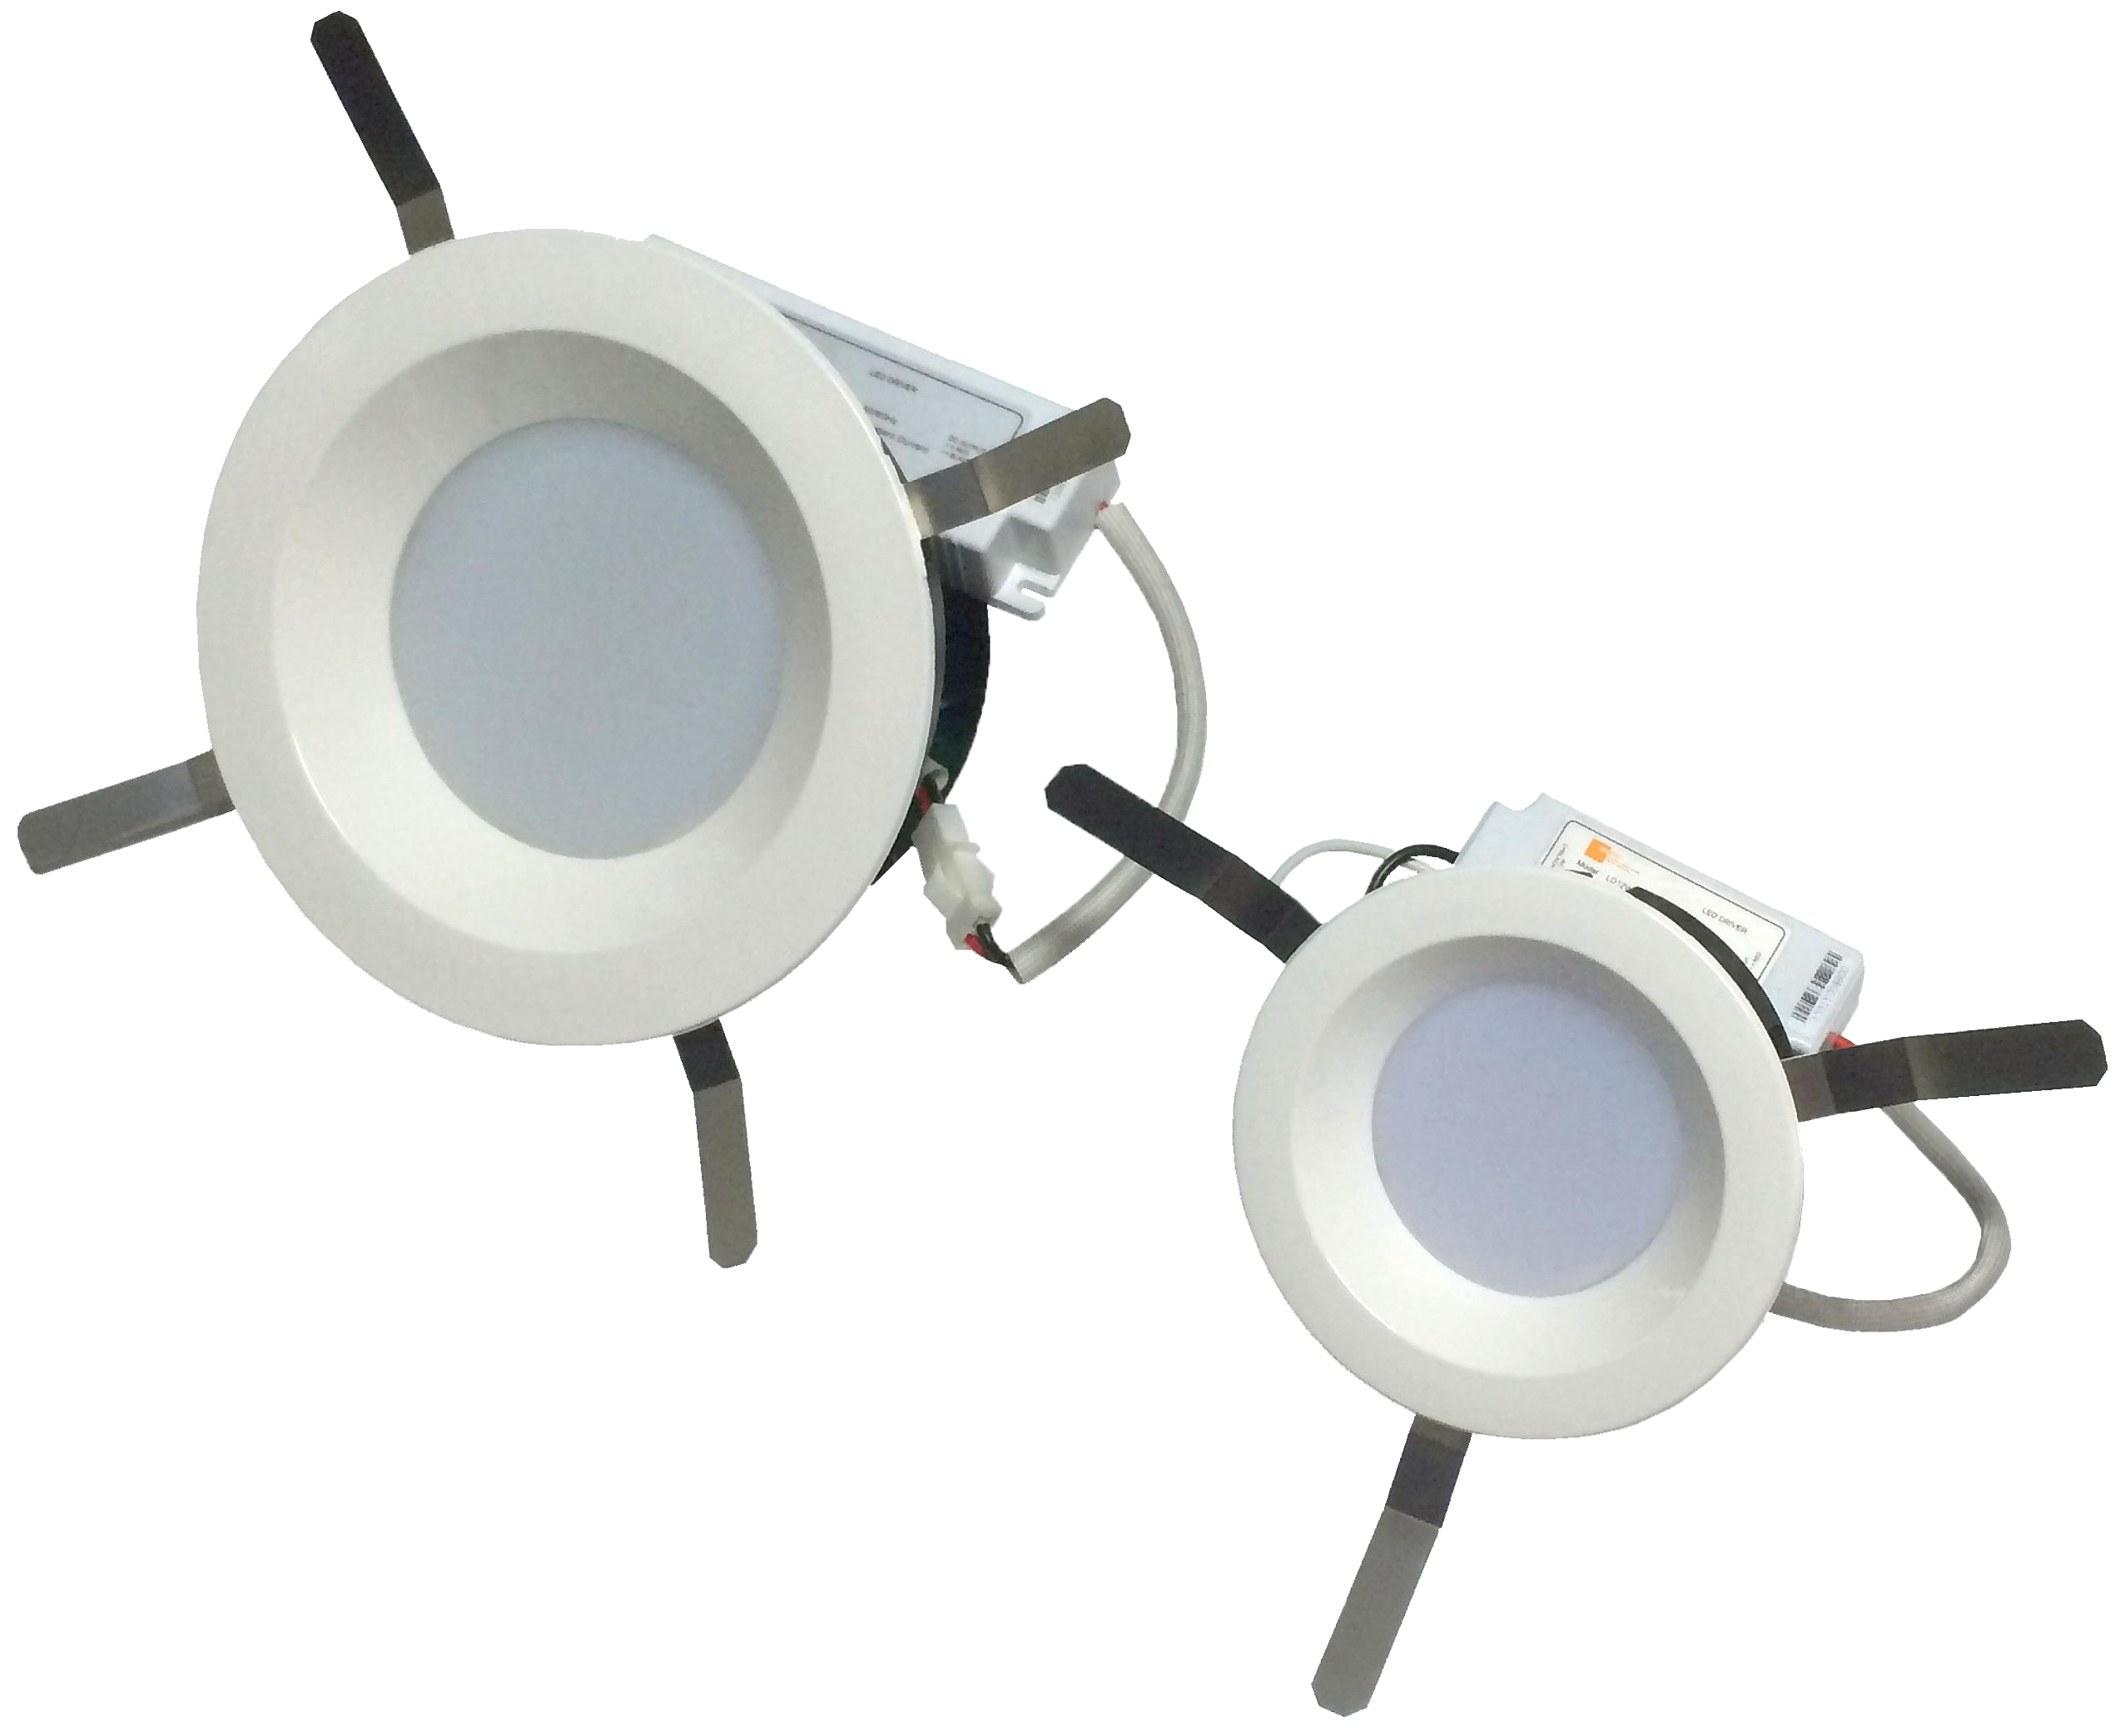 Wide angle downlight